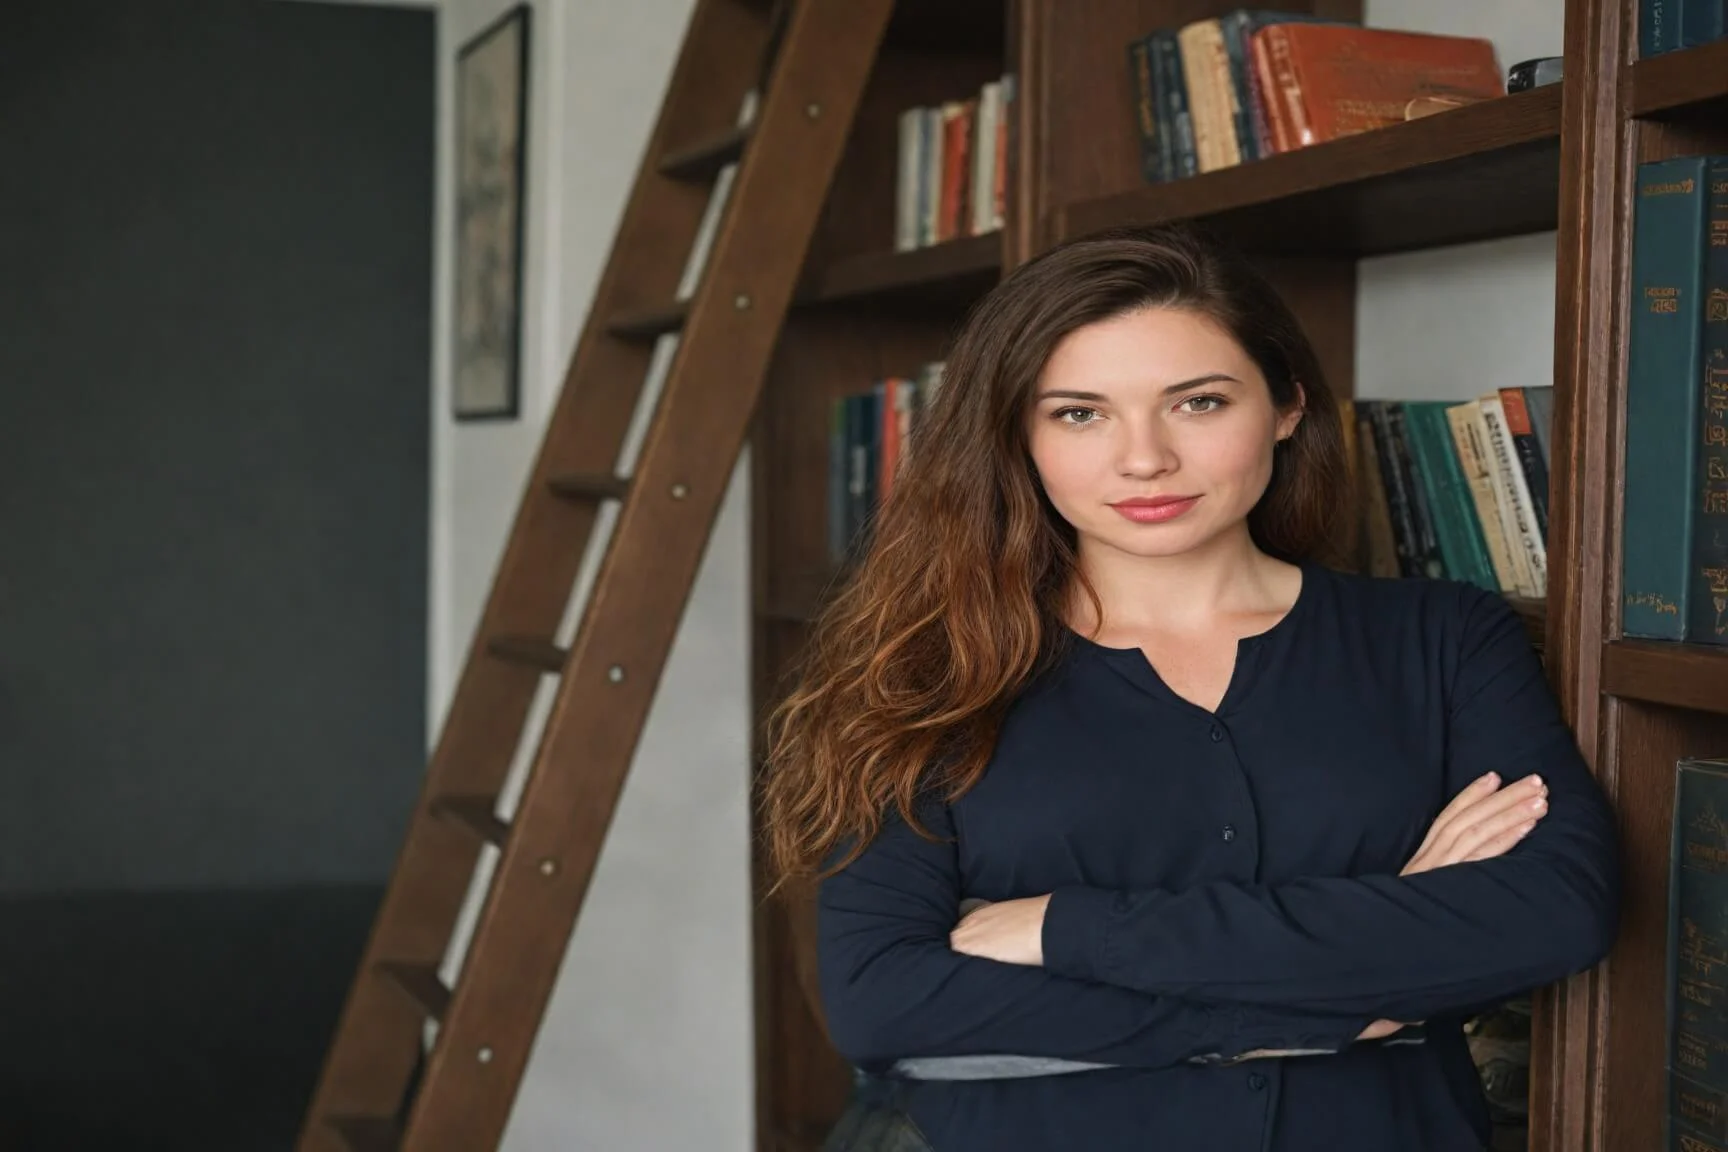 In Front of a Bookshelf, Professional Headshot Examples